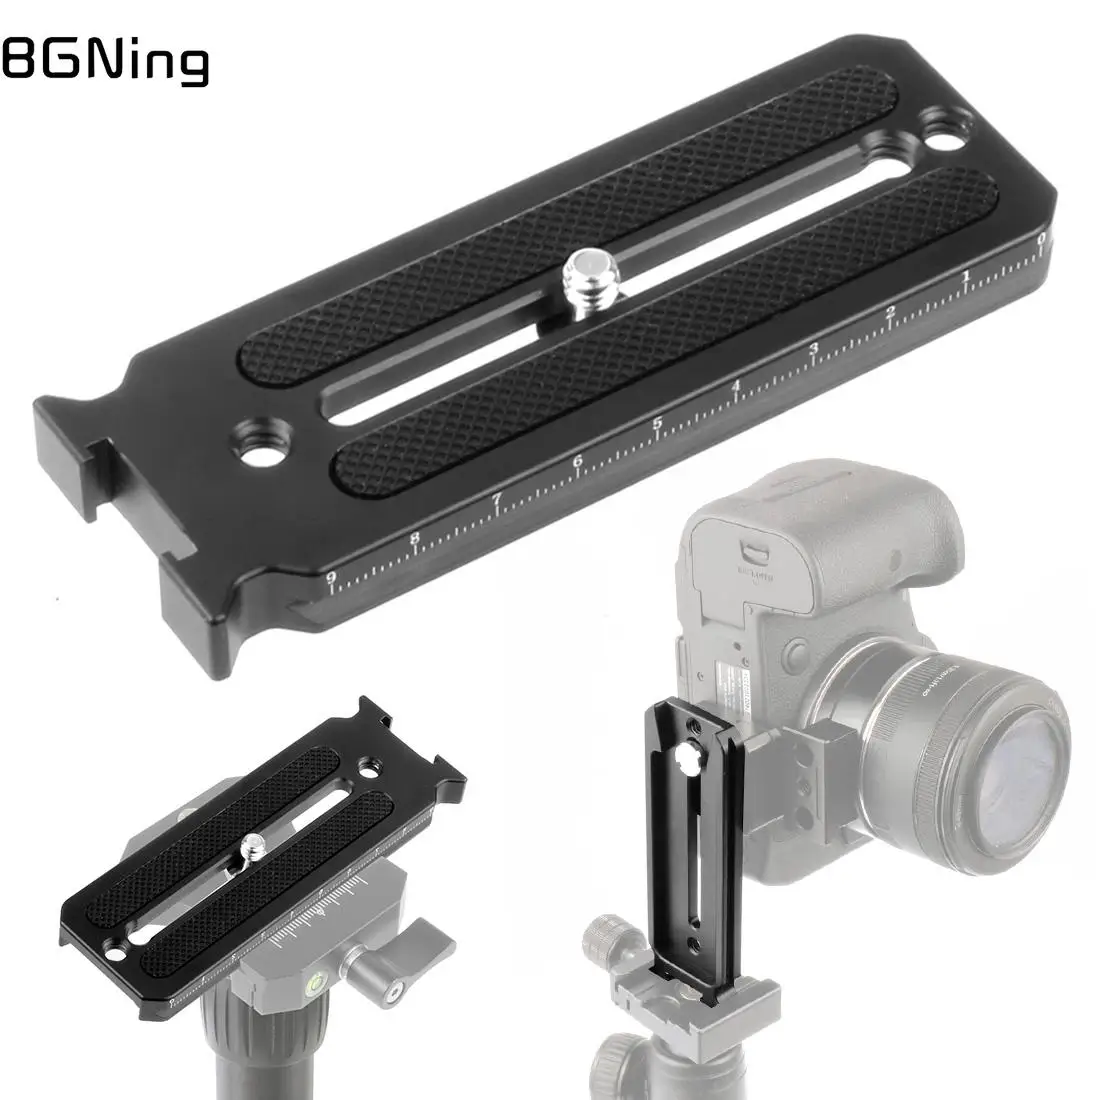 

BGNing Camera Horizontal Vertical Quick Release Plate with Cold Shoe Mount QR Plate For DSLR Camera for Ronin SC Stabilizer